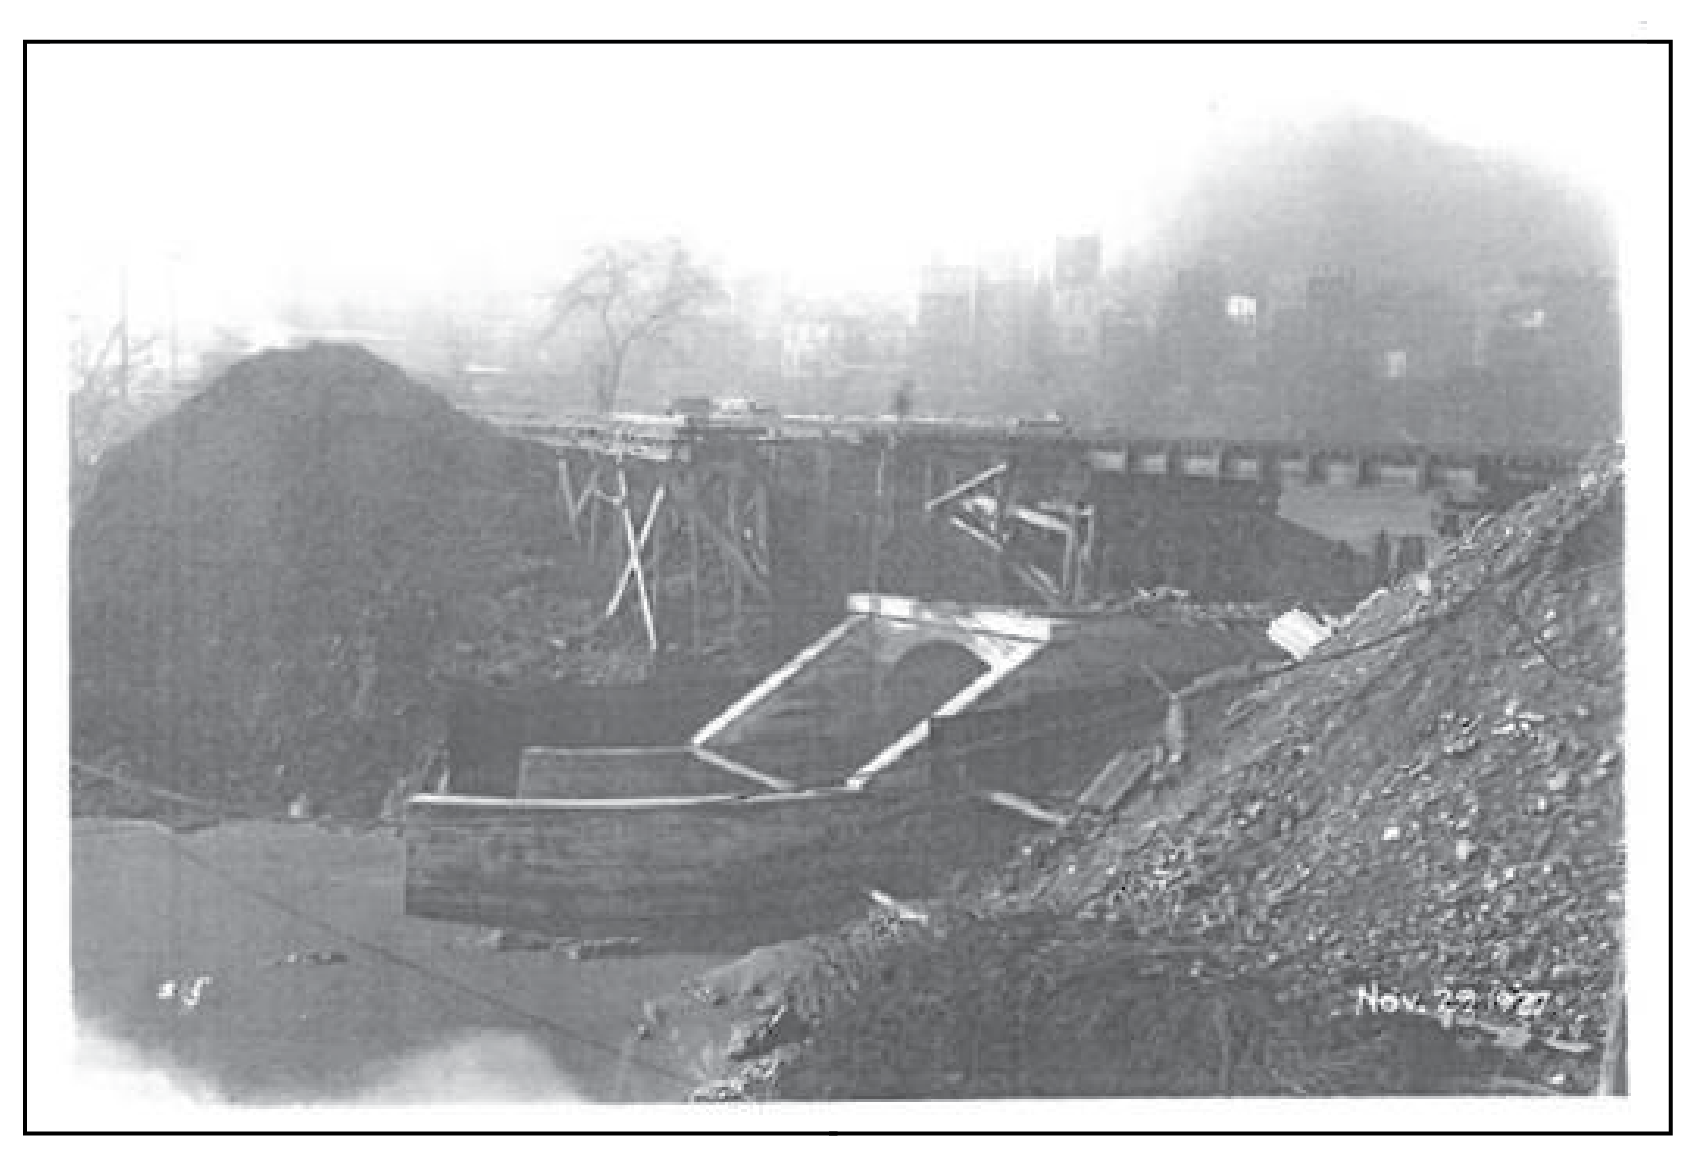 Outfall from the Lick Run sewer into the Mill Creek with Lunkenheimer in background, 1927